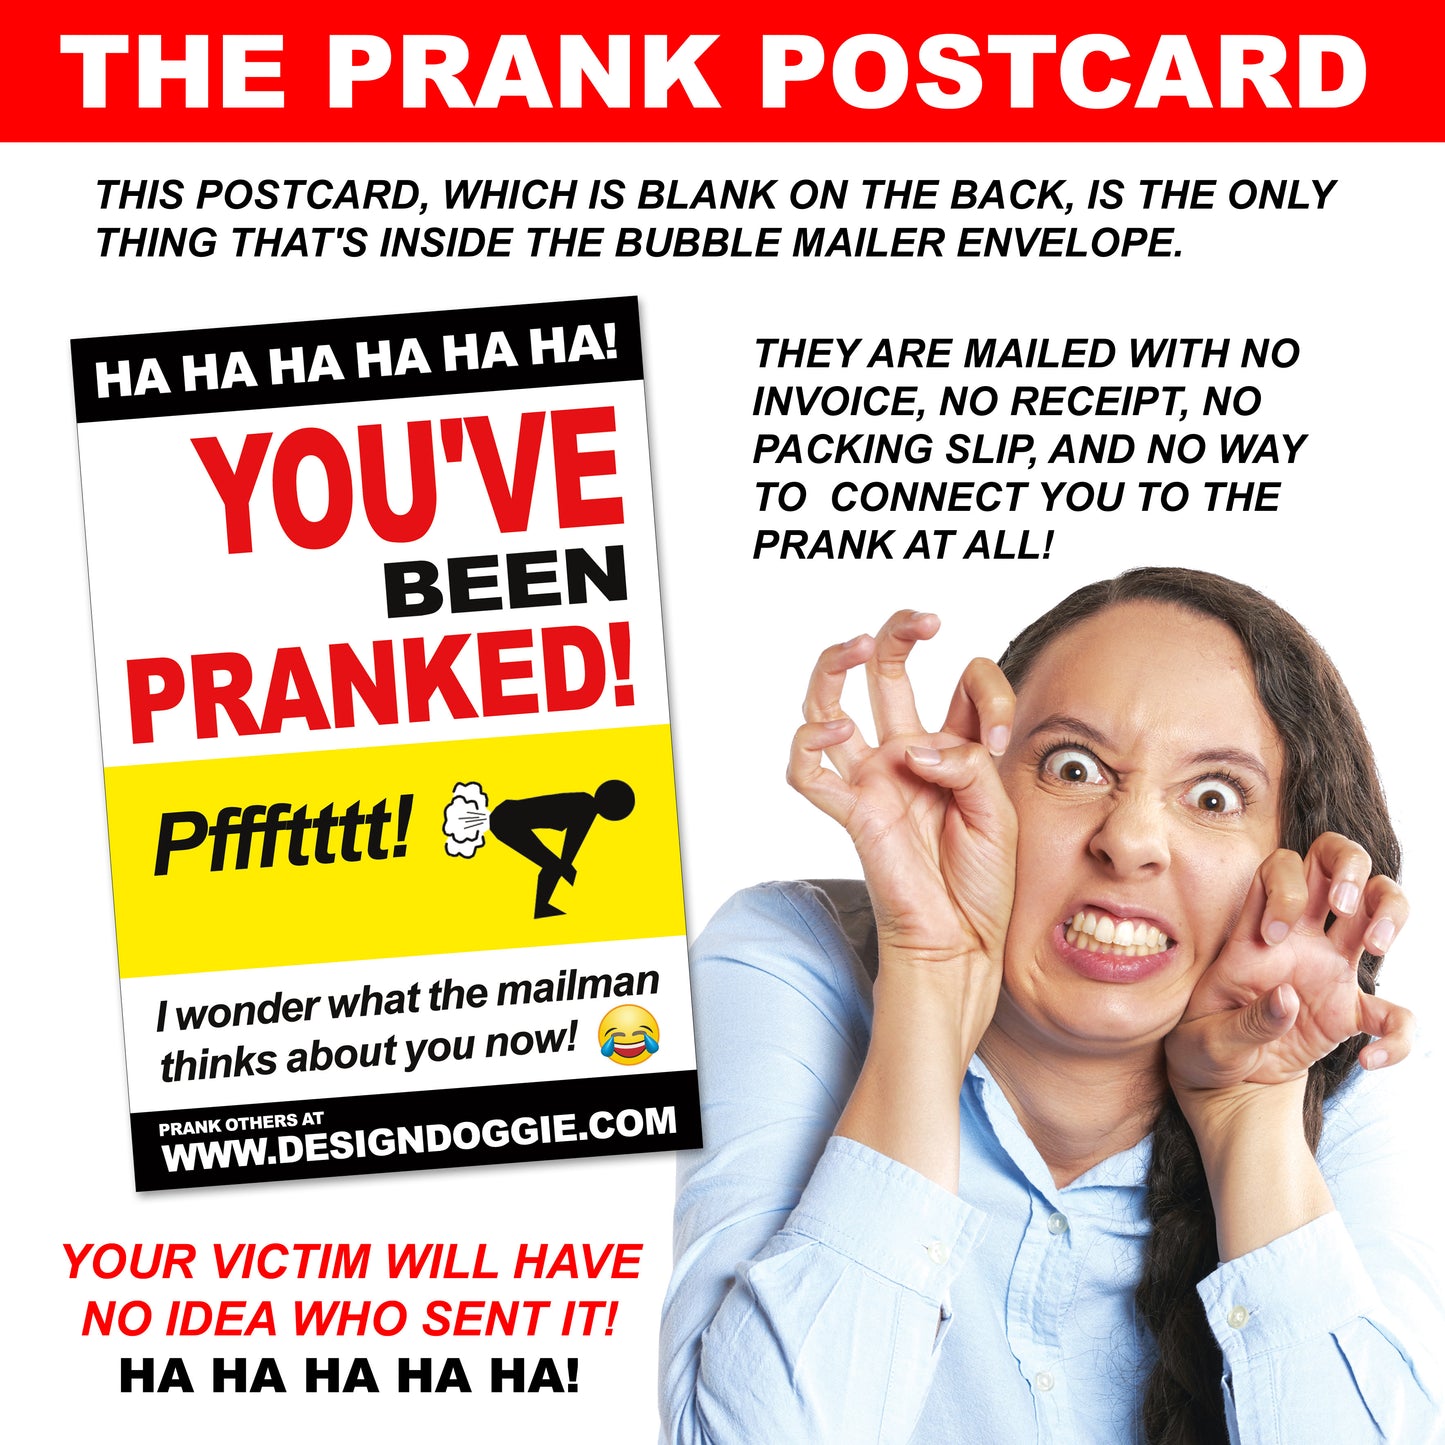 Dial A GILF embarrassing prank envelope gets mailed directly to your victims 100% anonymously!